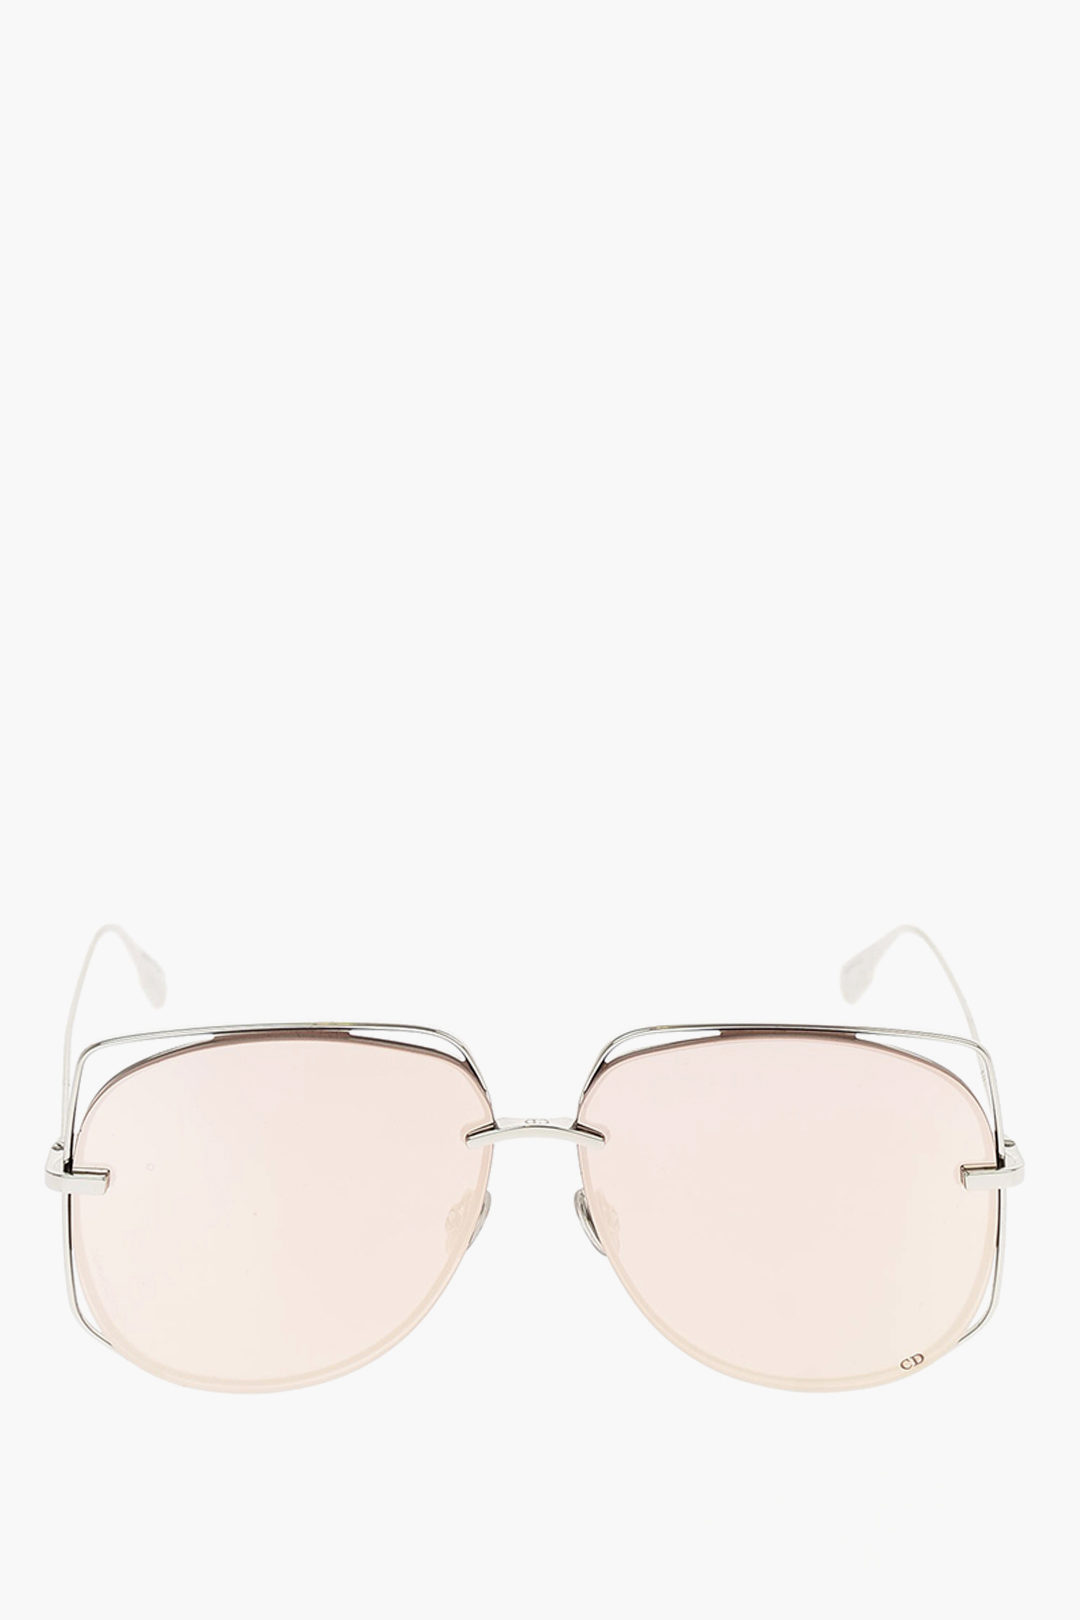 MorningSave Designer Sunglass Outlet Featuring Christian Dior Kate  Spade and More